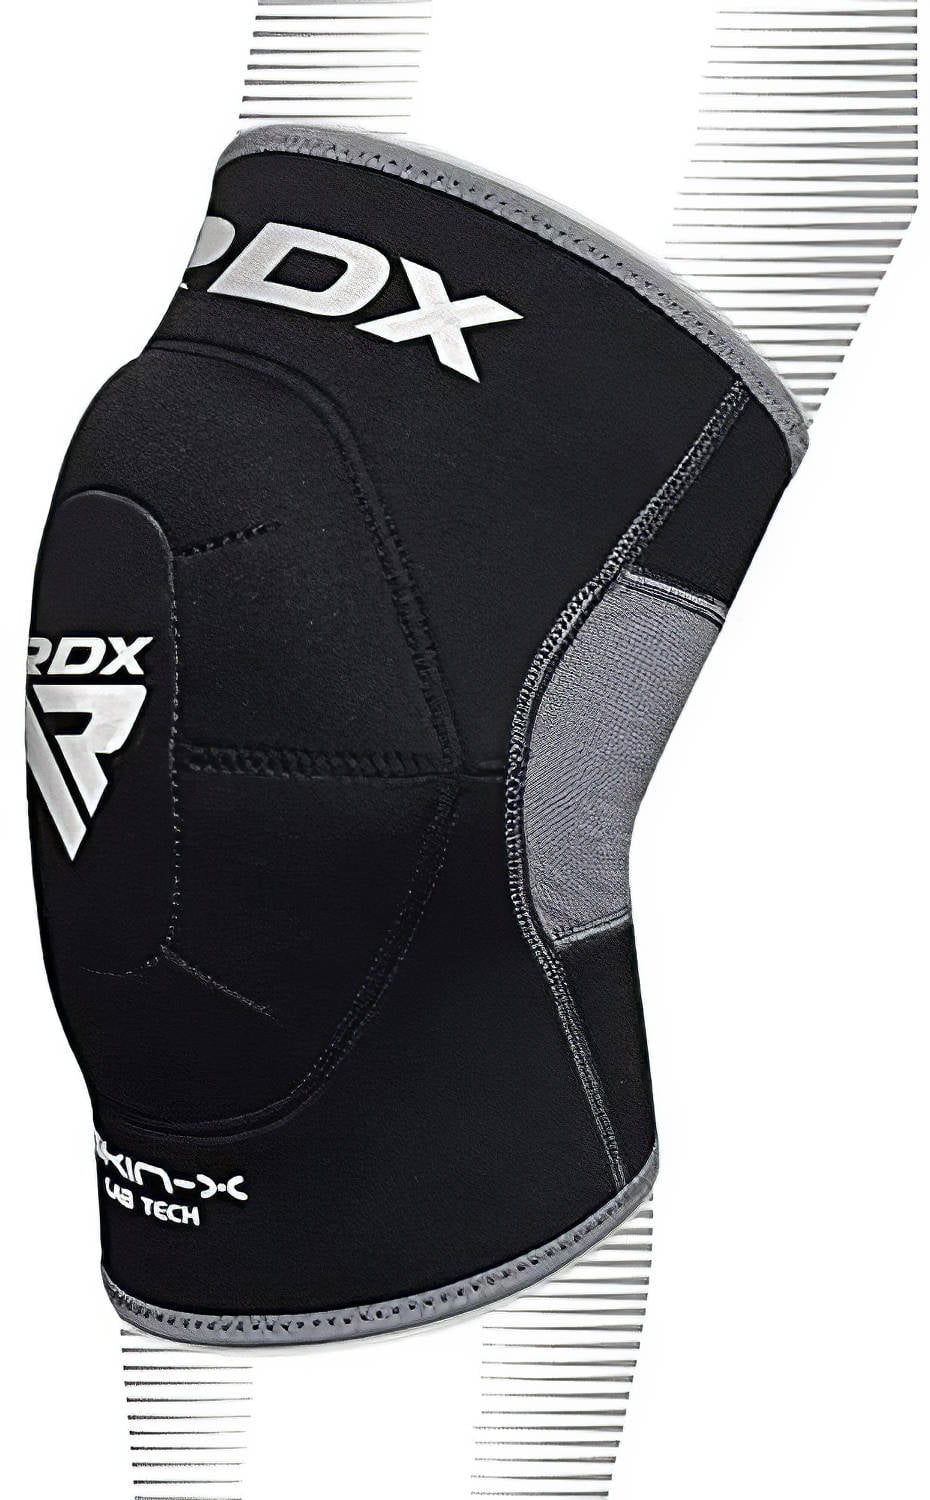 Wicking Padded Protective Knee Guards IXS Hack Unisex Breathable Moisture- Knee pads Knee Protective Gear - Knee Compression Sleeve Support for Men & Women Youth Knee Pads Black, XXL 